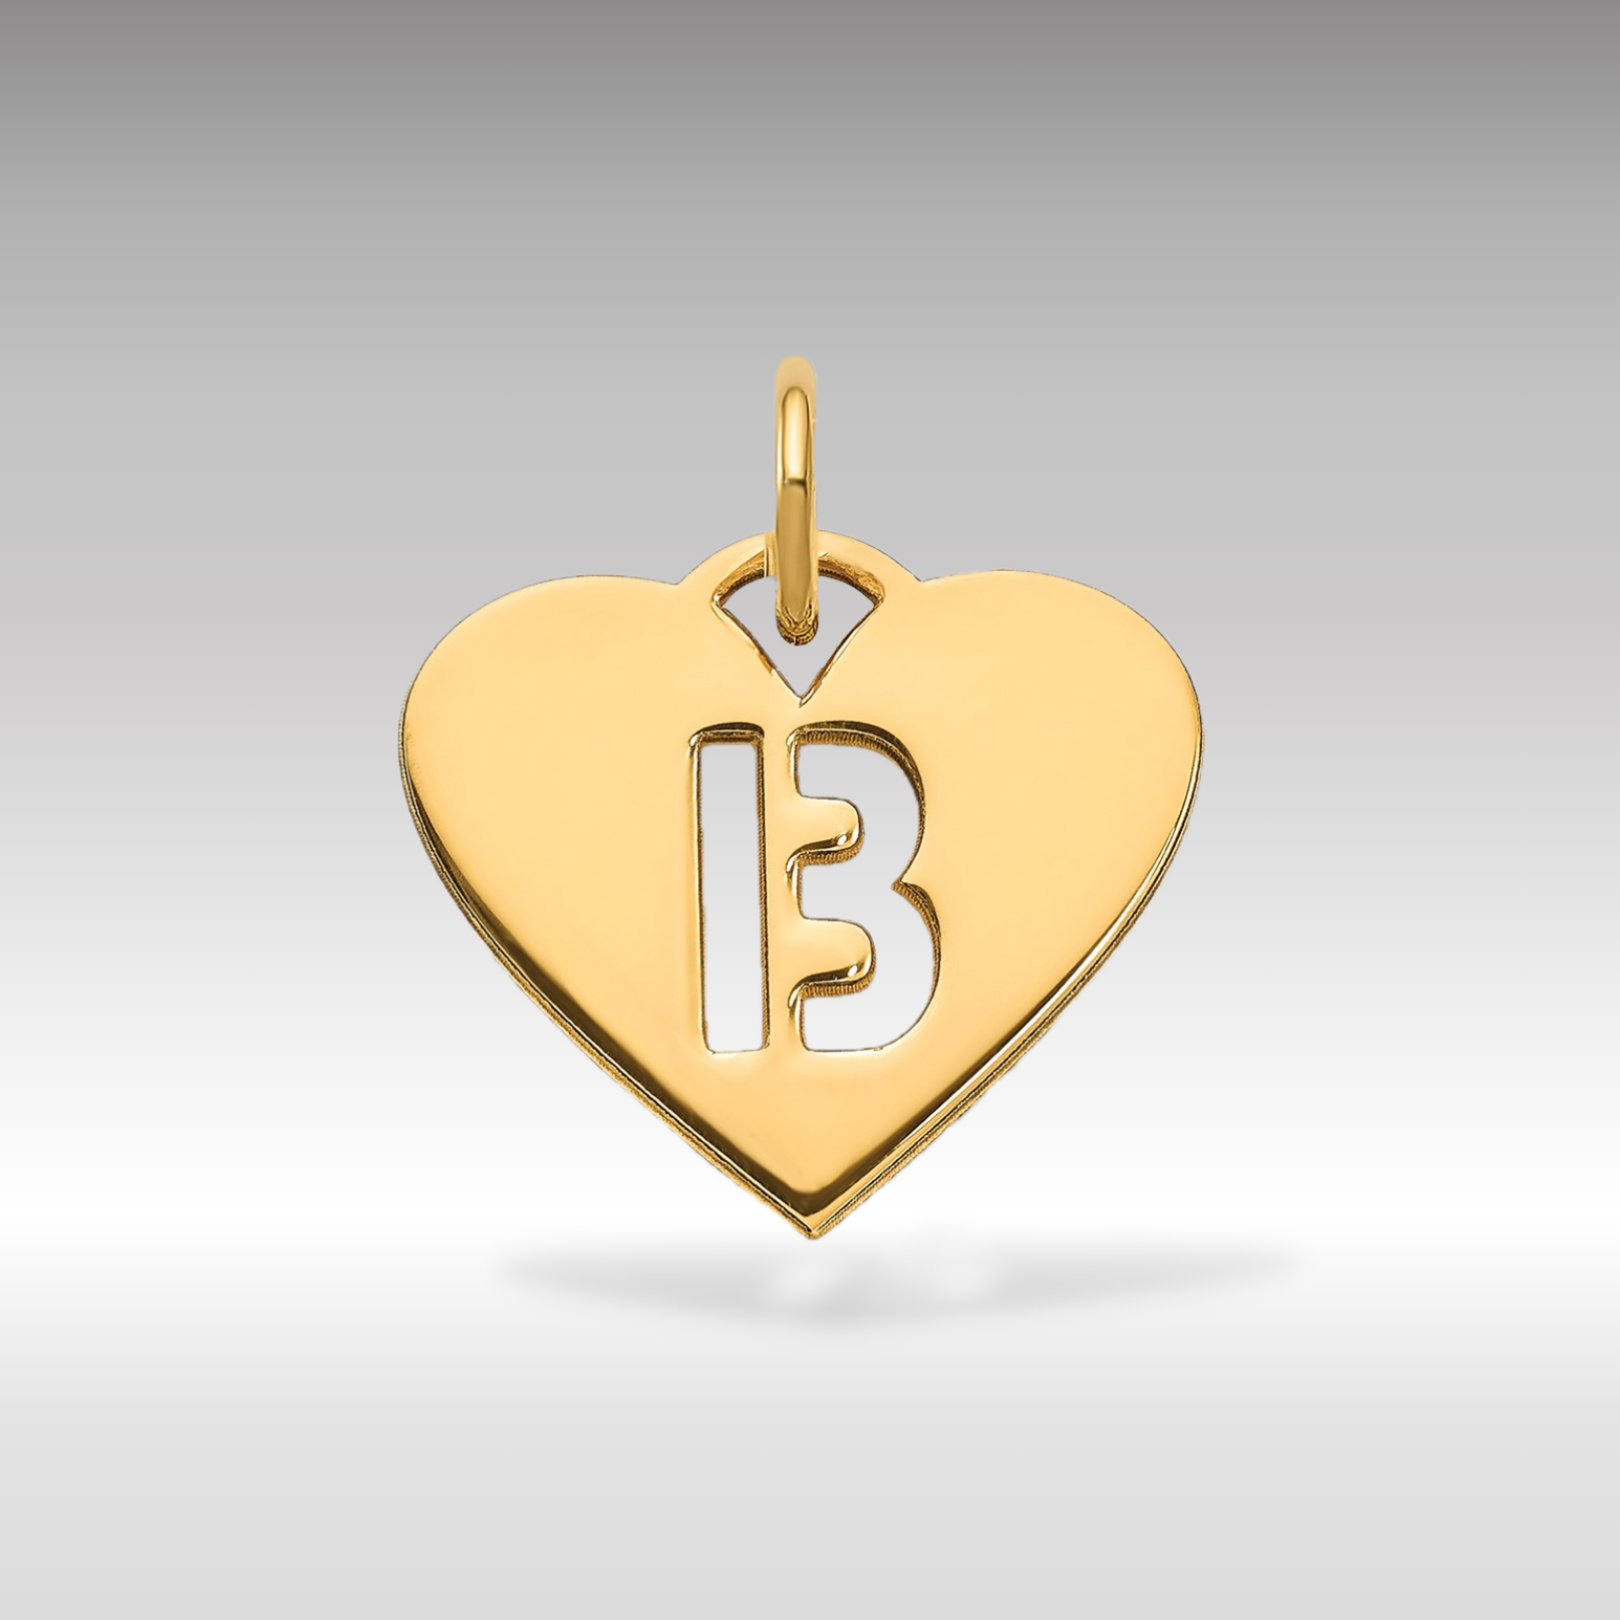 14K Gold Heart Pendant with Letter 'B' - Charlie & Co. Jewelry